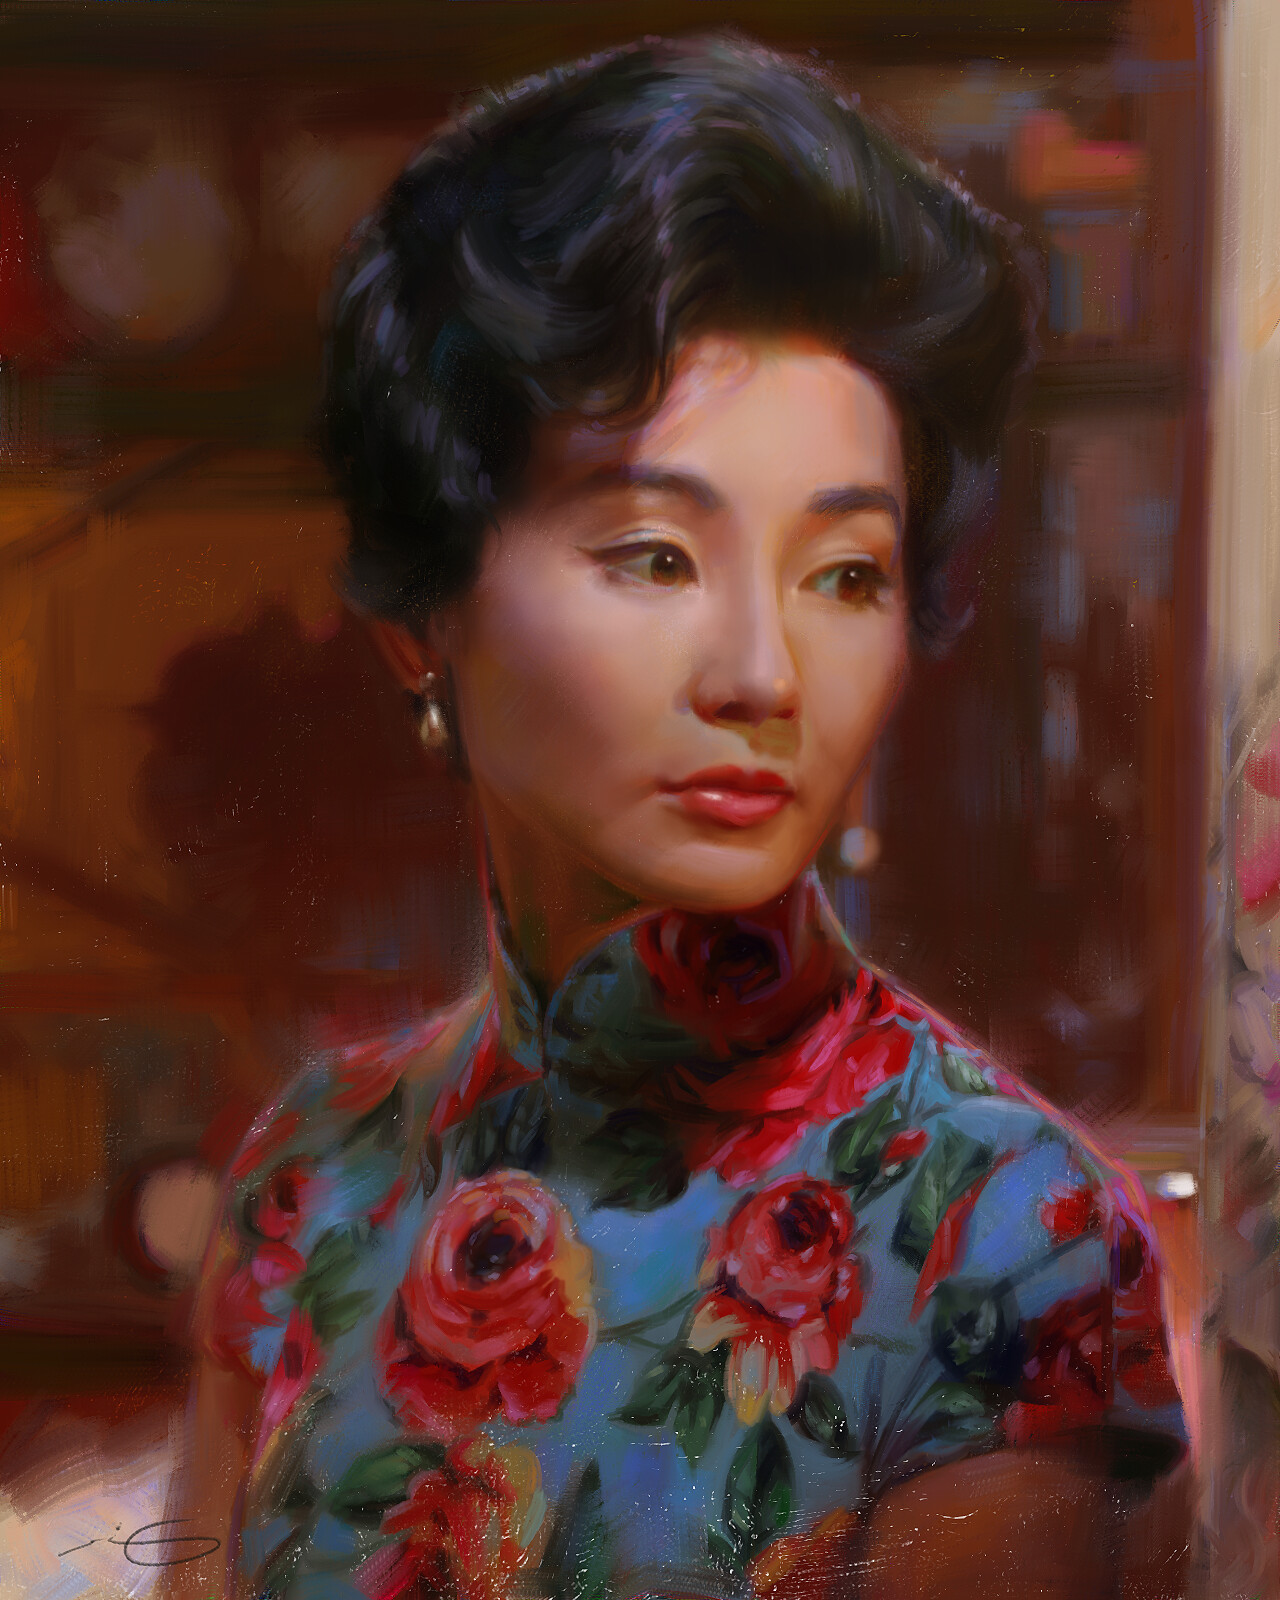 General 1280x1600 In the Mood for Love chinese dress portrait artwork looking sideways Chinese women women Asian actress brunette red lipstick brown eyes portrait display closed mouth earring Shi-An Matthew King digital art looking away floral